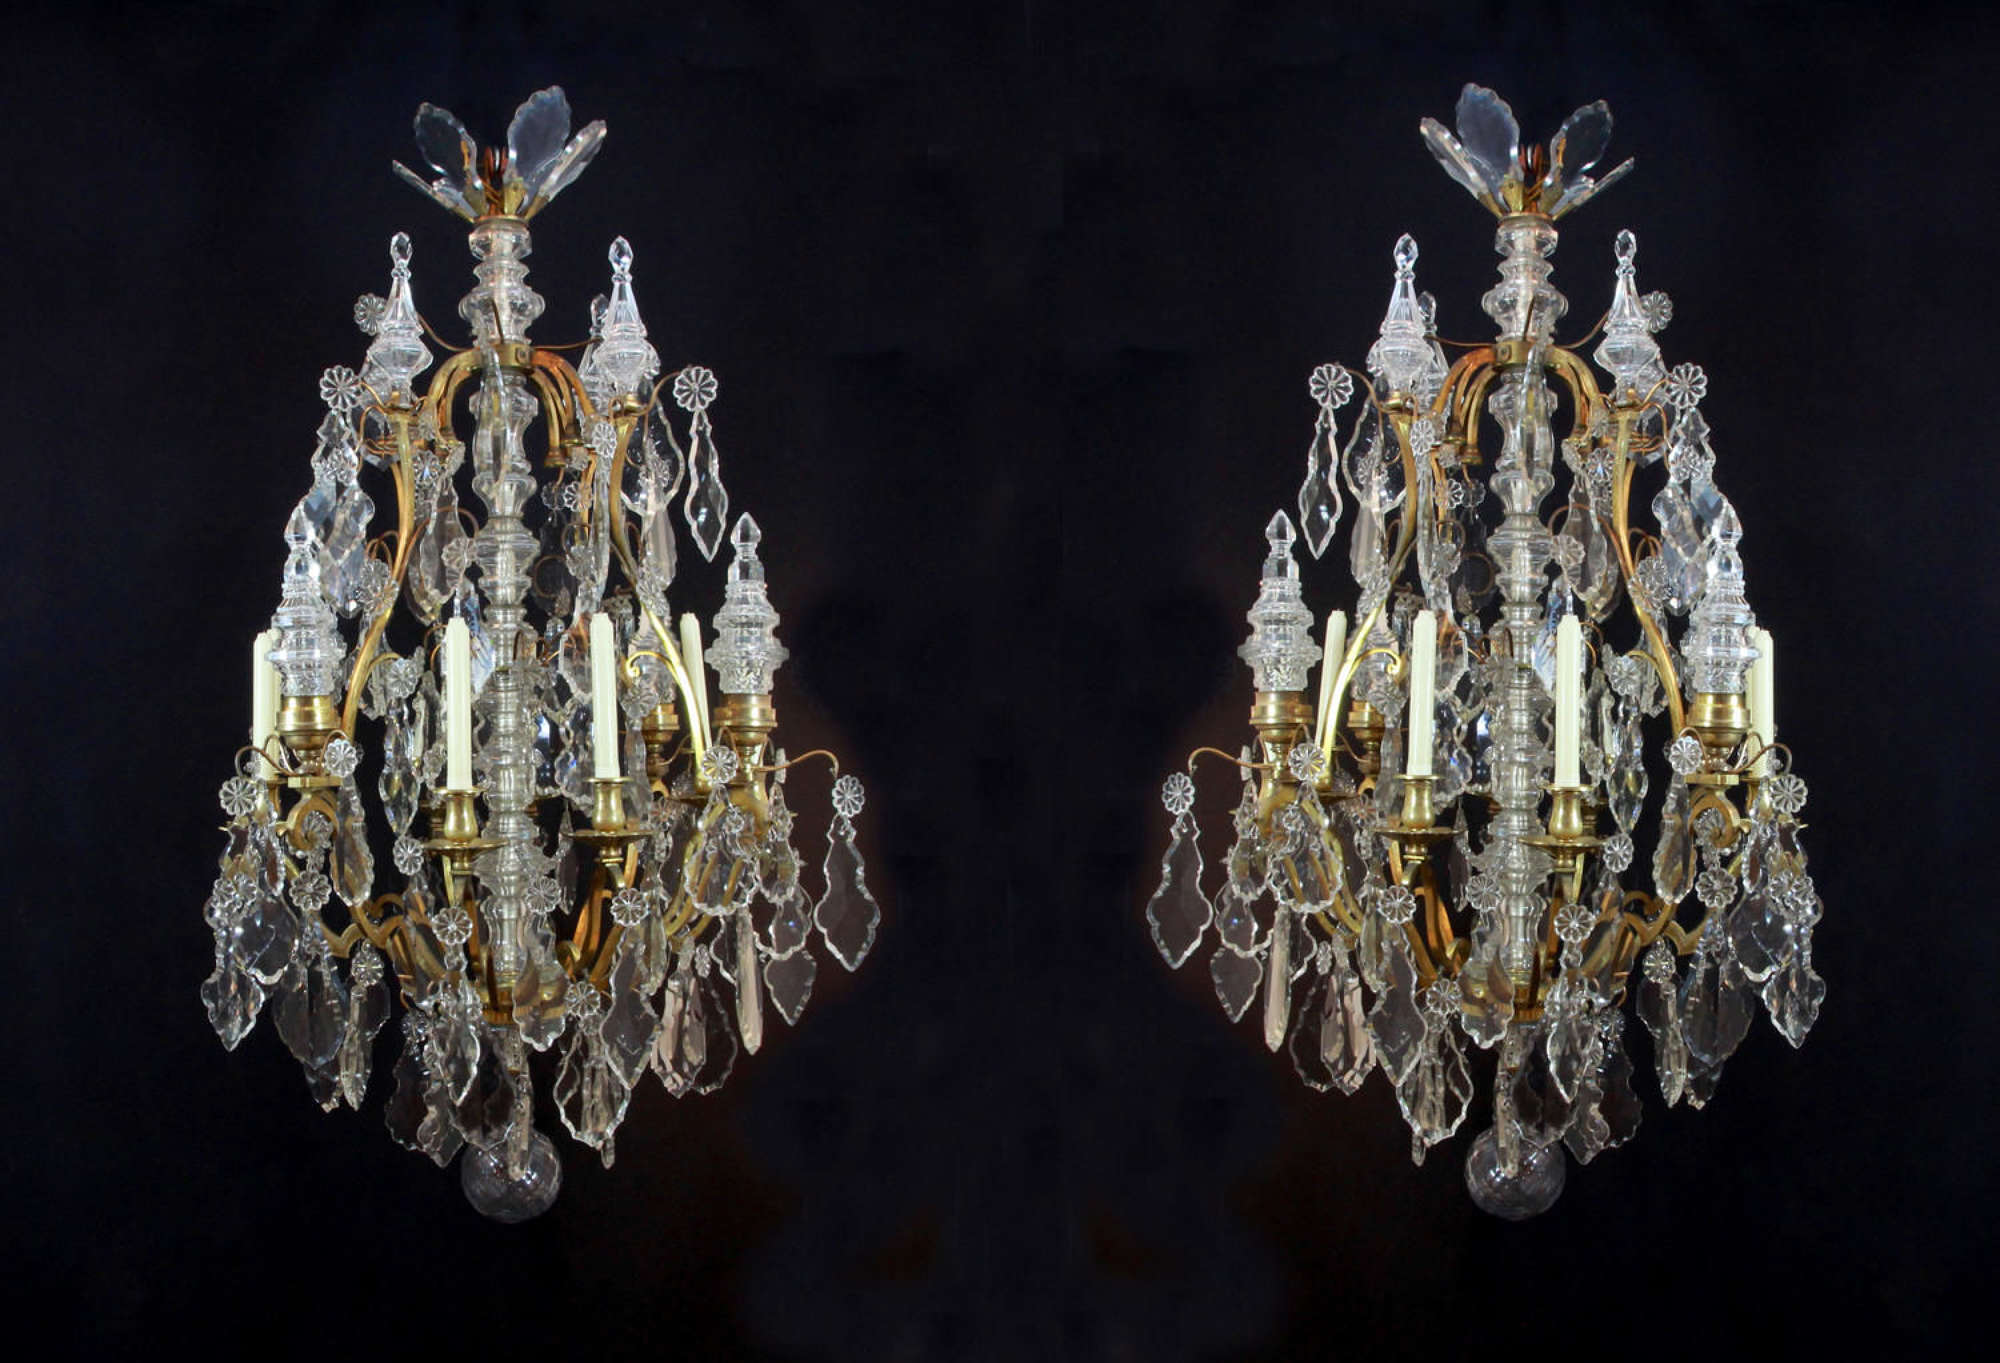 A pair of superb 18th c style chandeliers